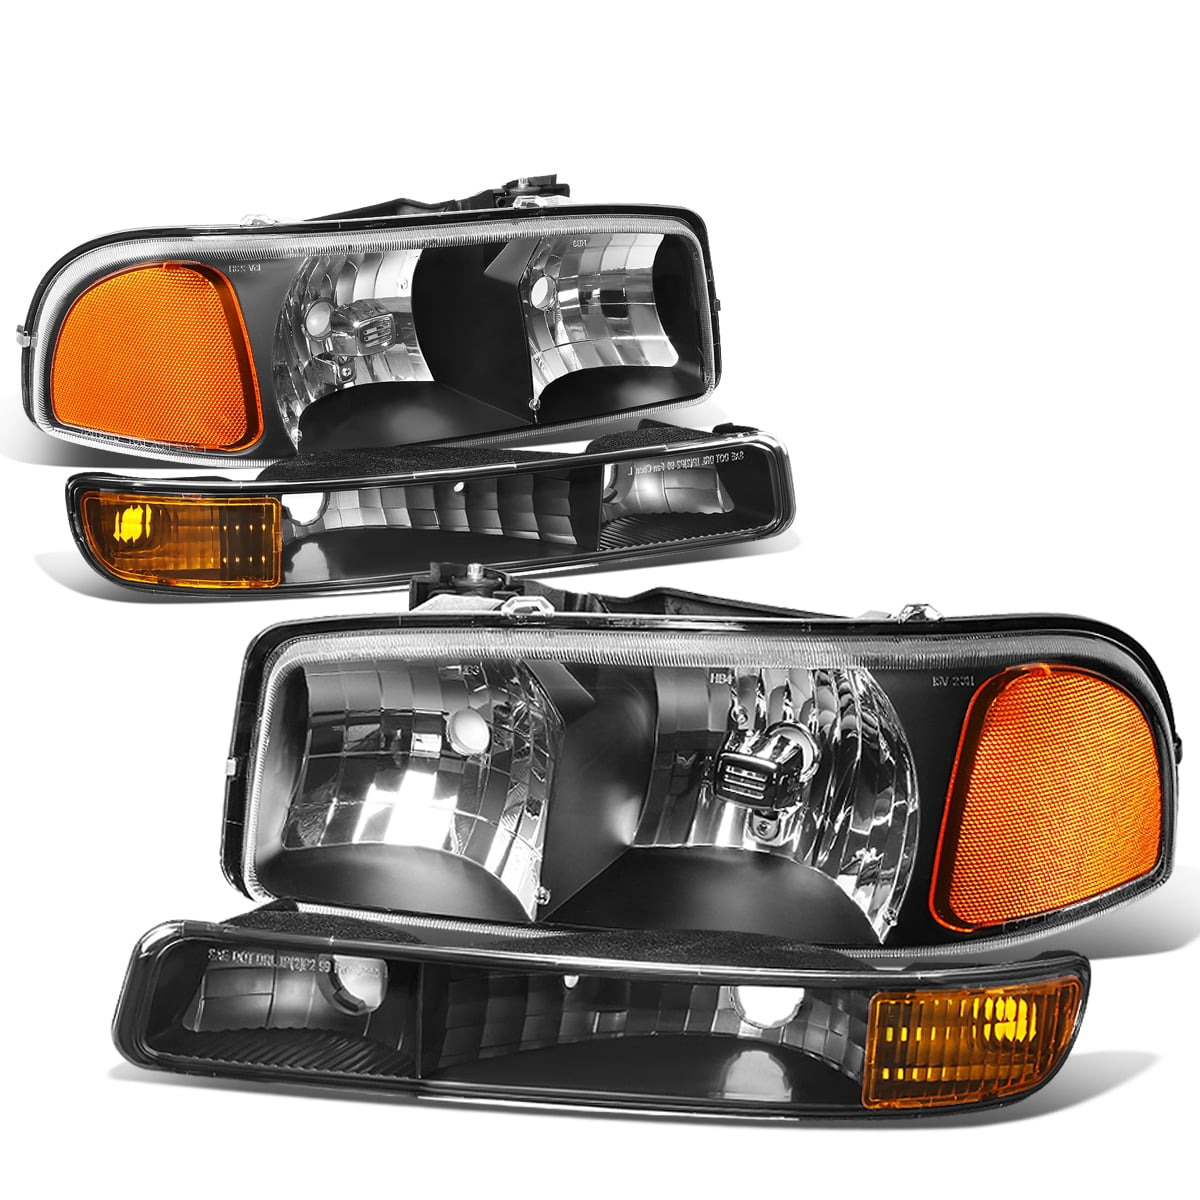 Black Housing Amber Corner LED DRL Headlights with Bumper Lamps Compatible with GMC Sierra Yukon XL GMT800 99-07 Driver and Passenger Side 